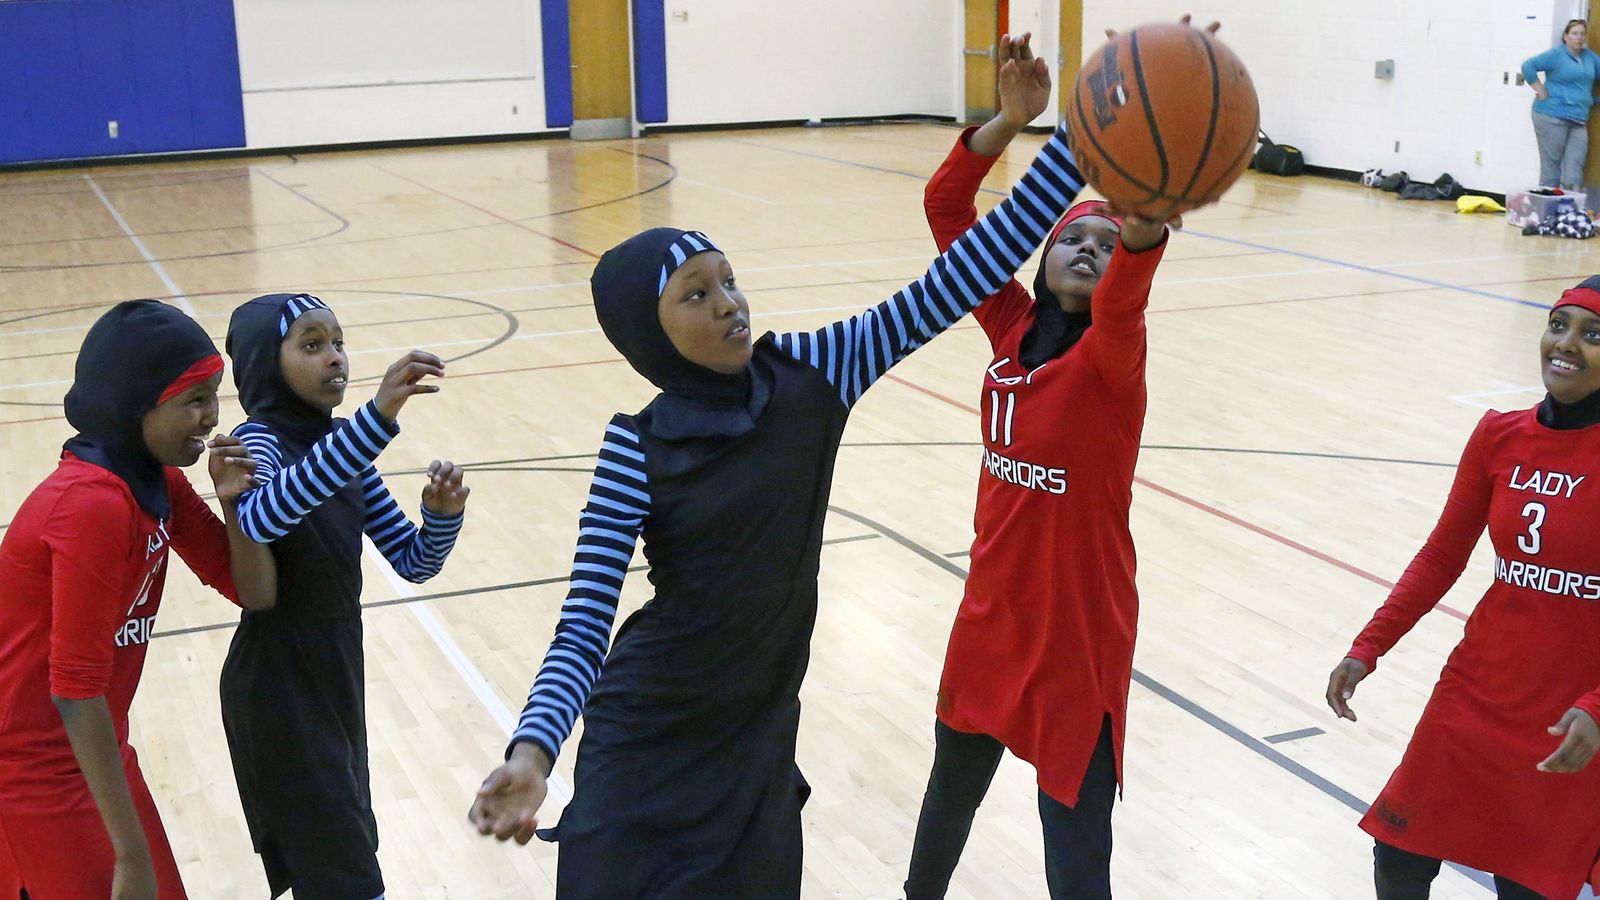 Maryland's high school athletes can now wear their hijabs during sports tournaments